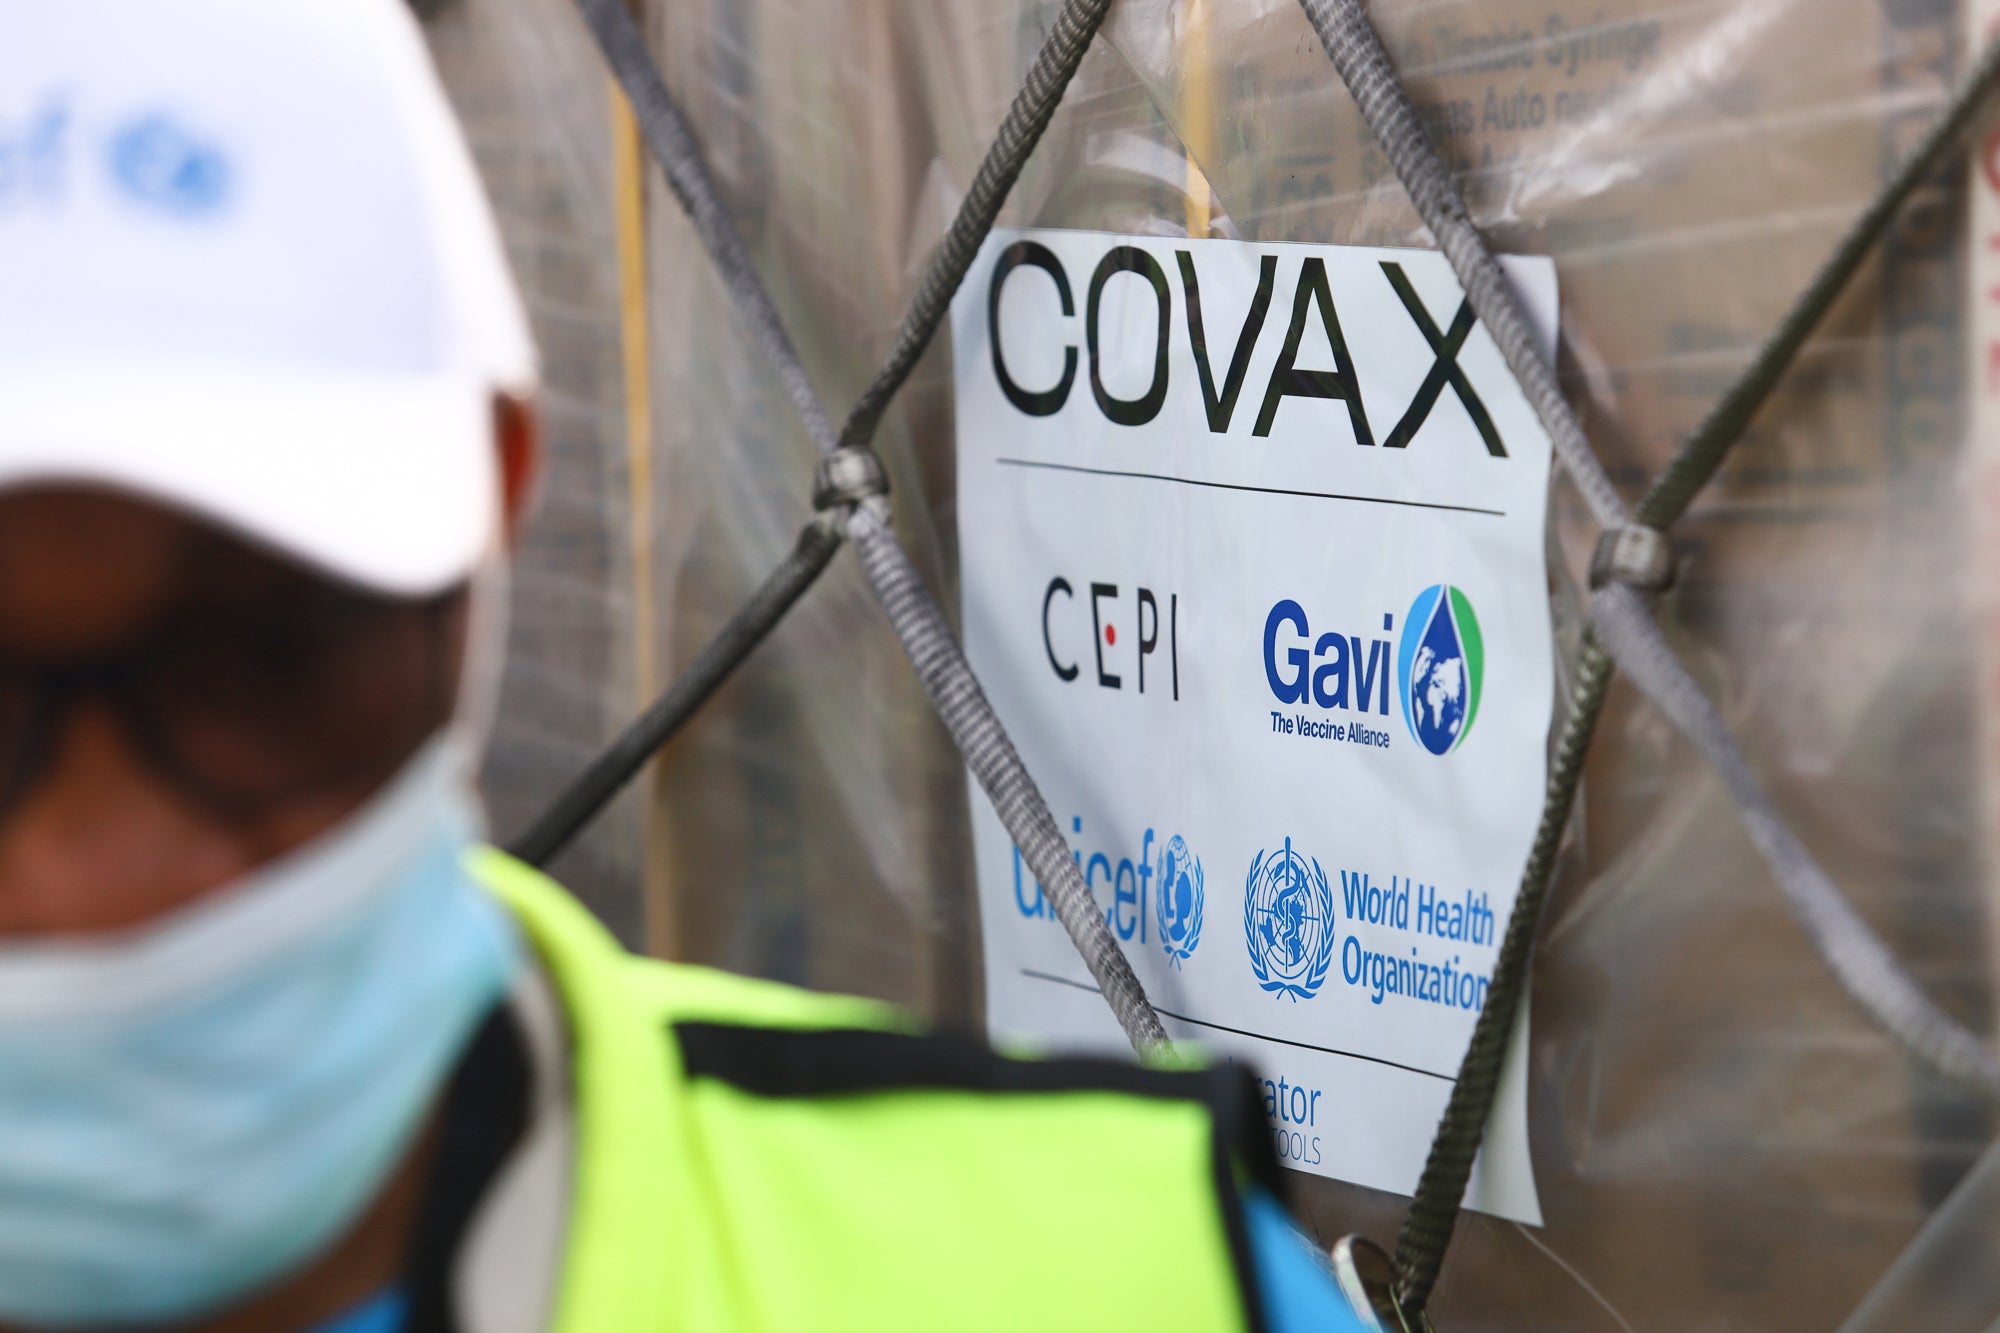 Covax has shipped only 60 million doses. This is less than a quarter of the number administered in the US